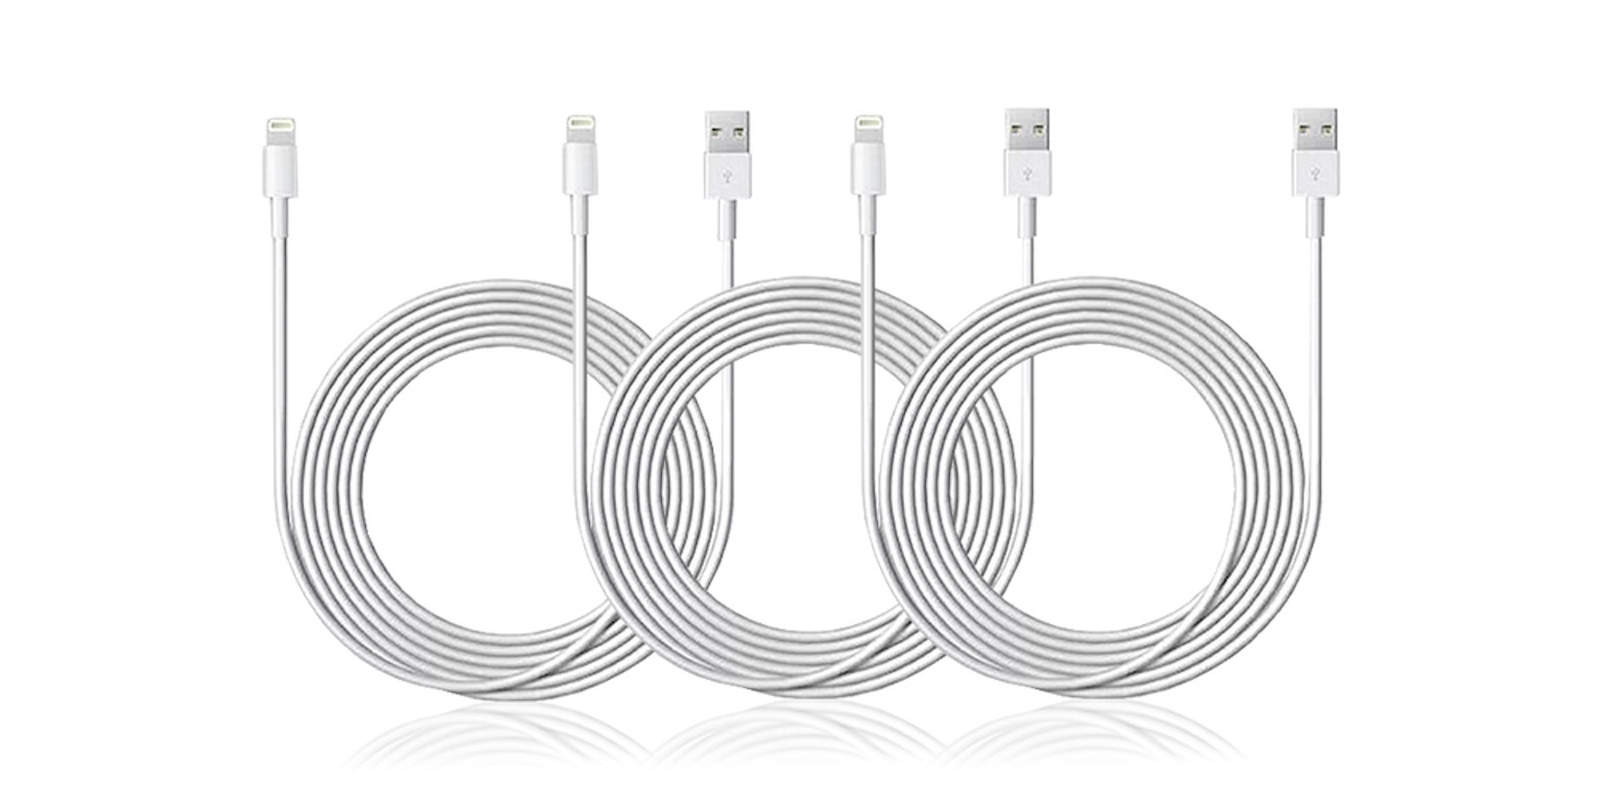 Get three MFi-certified, extra long Lightning cables for around the price of a single standard one.